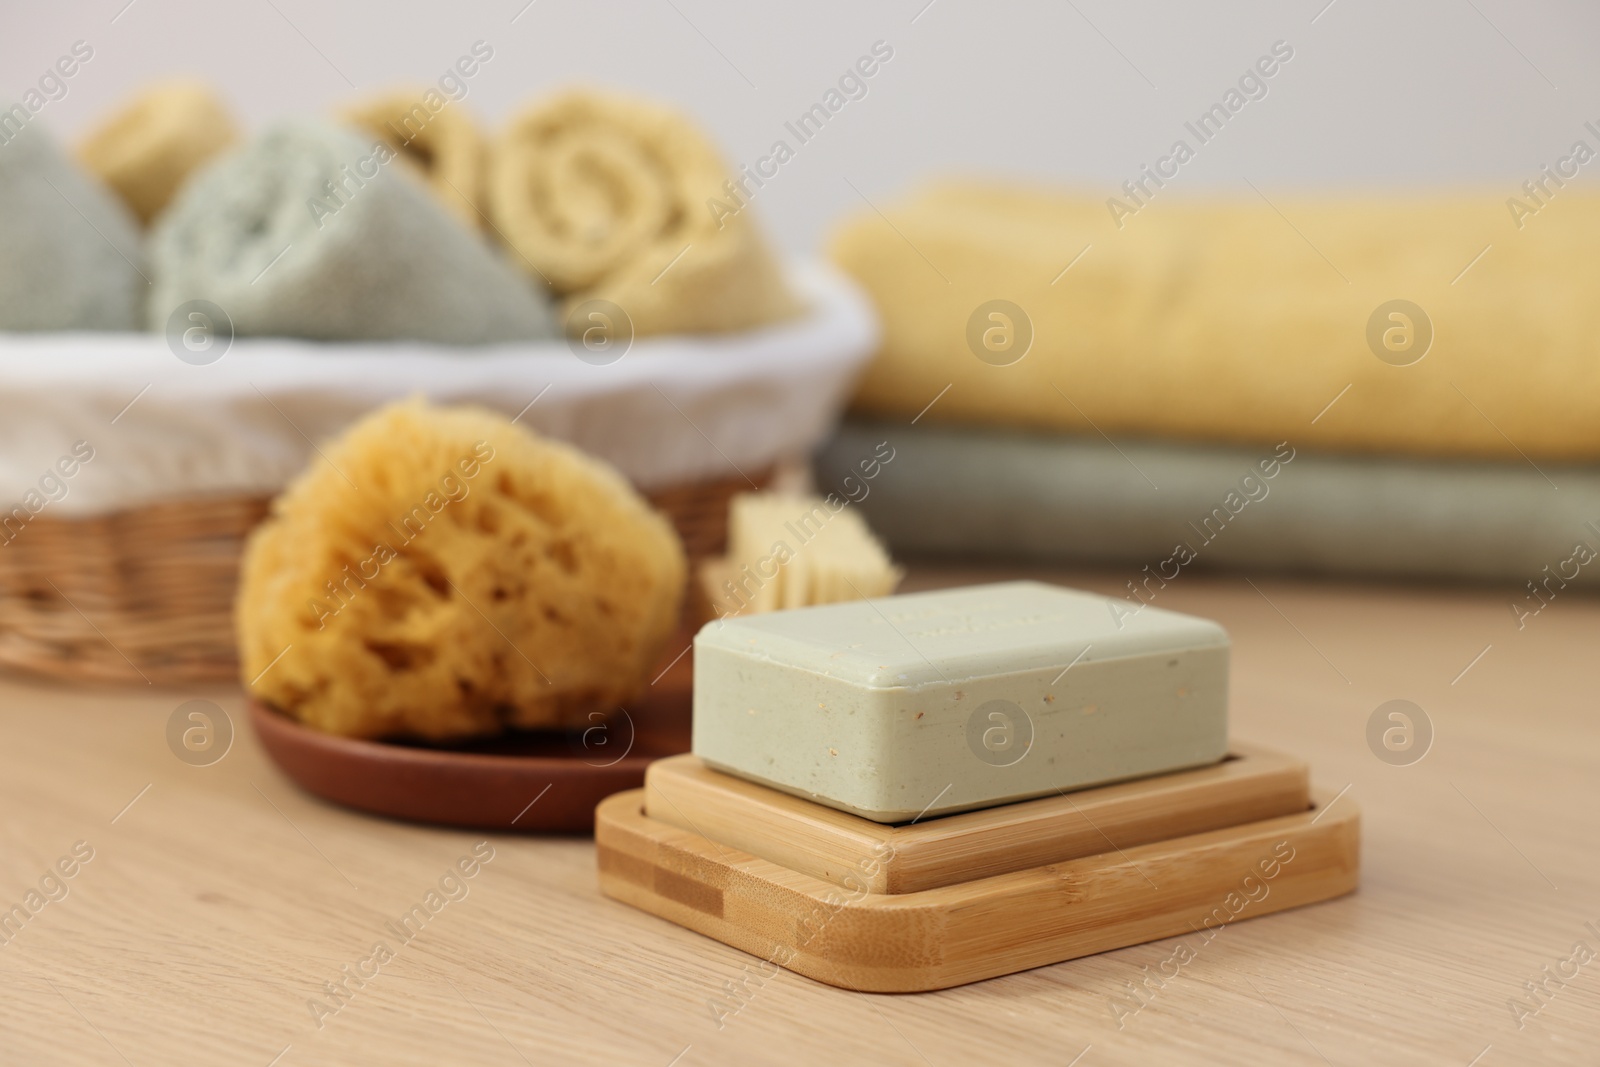 Photo of Soap bar and sponge on light wooden table. Spa therapy